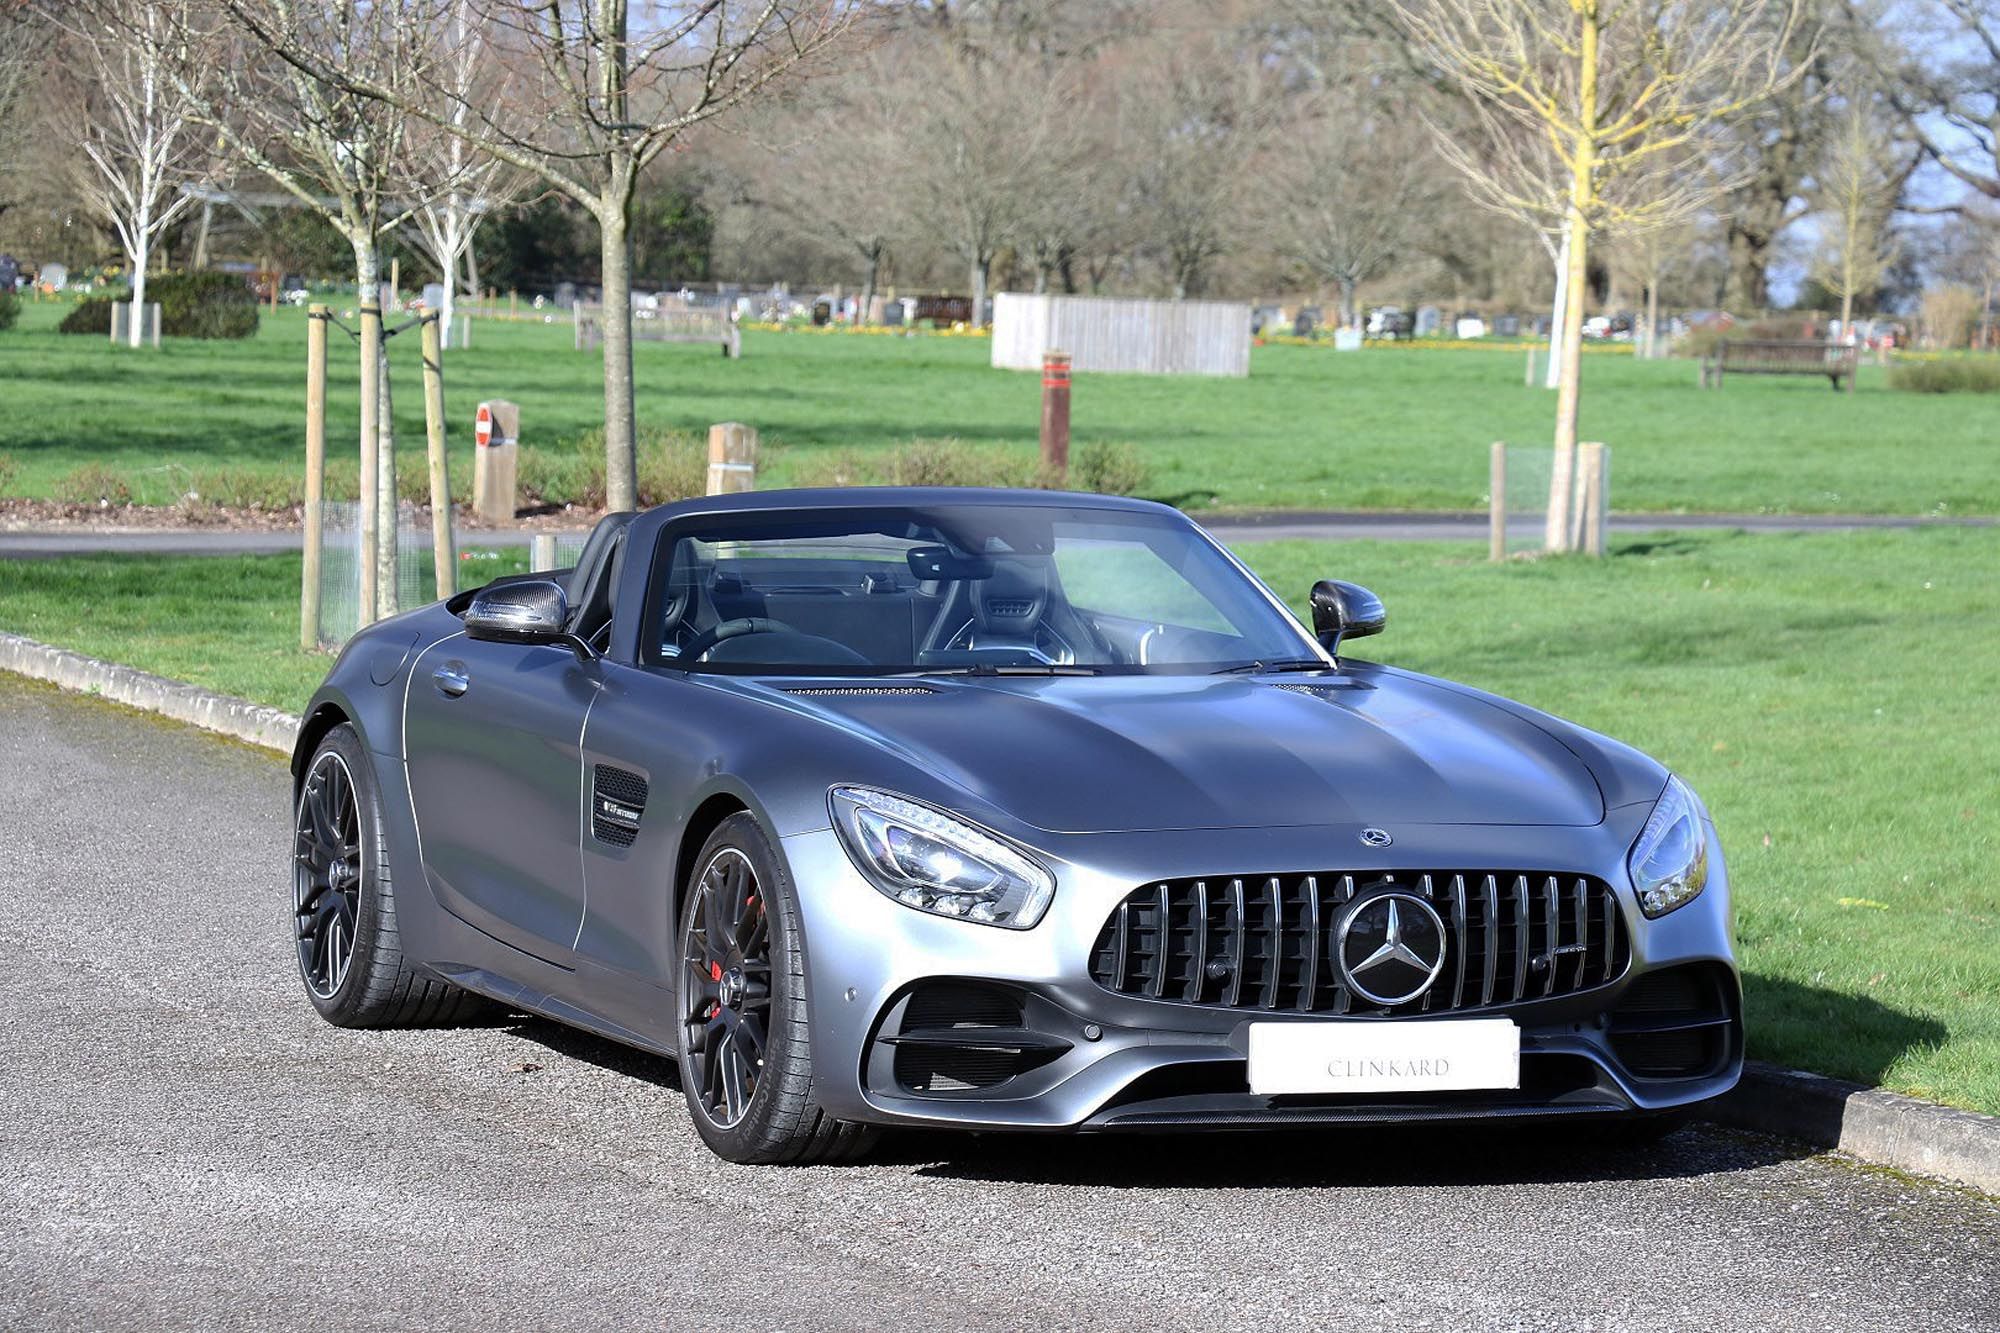 Mercedes Amg Gtc Roadster Premium Dynamic Plus For Sale Clinkard Performance Cars